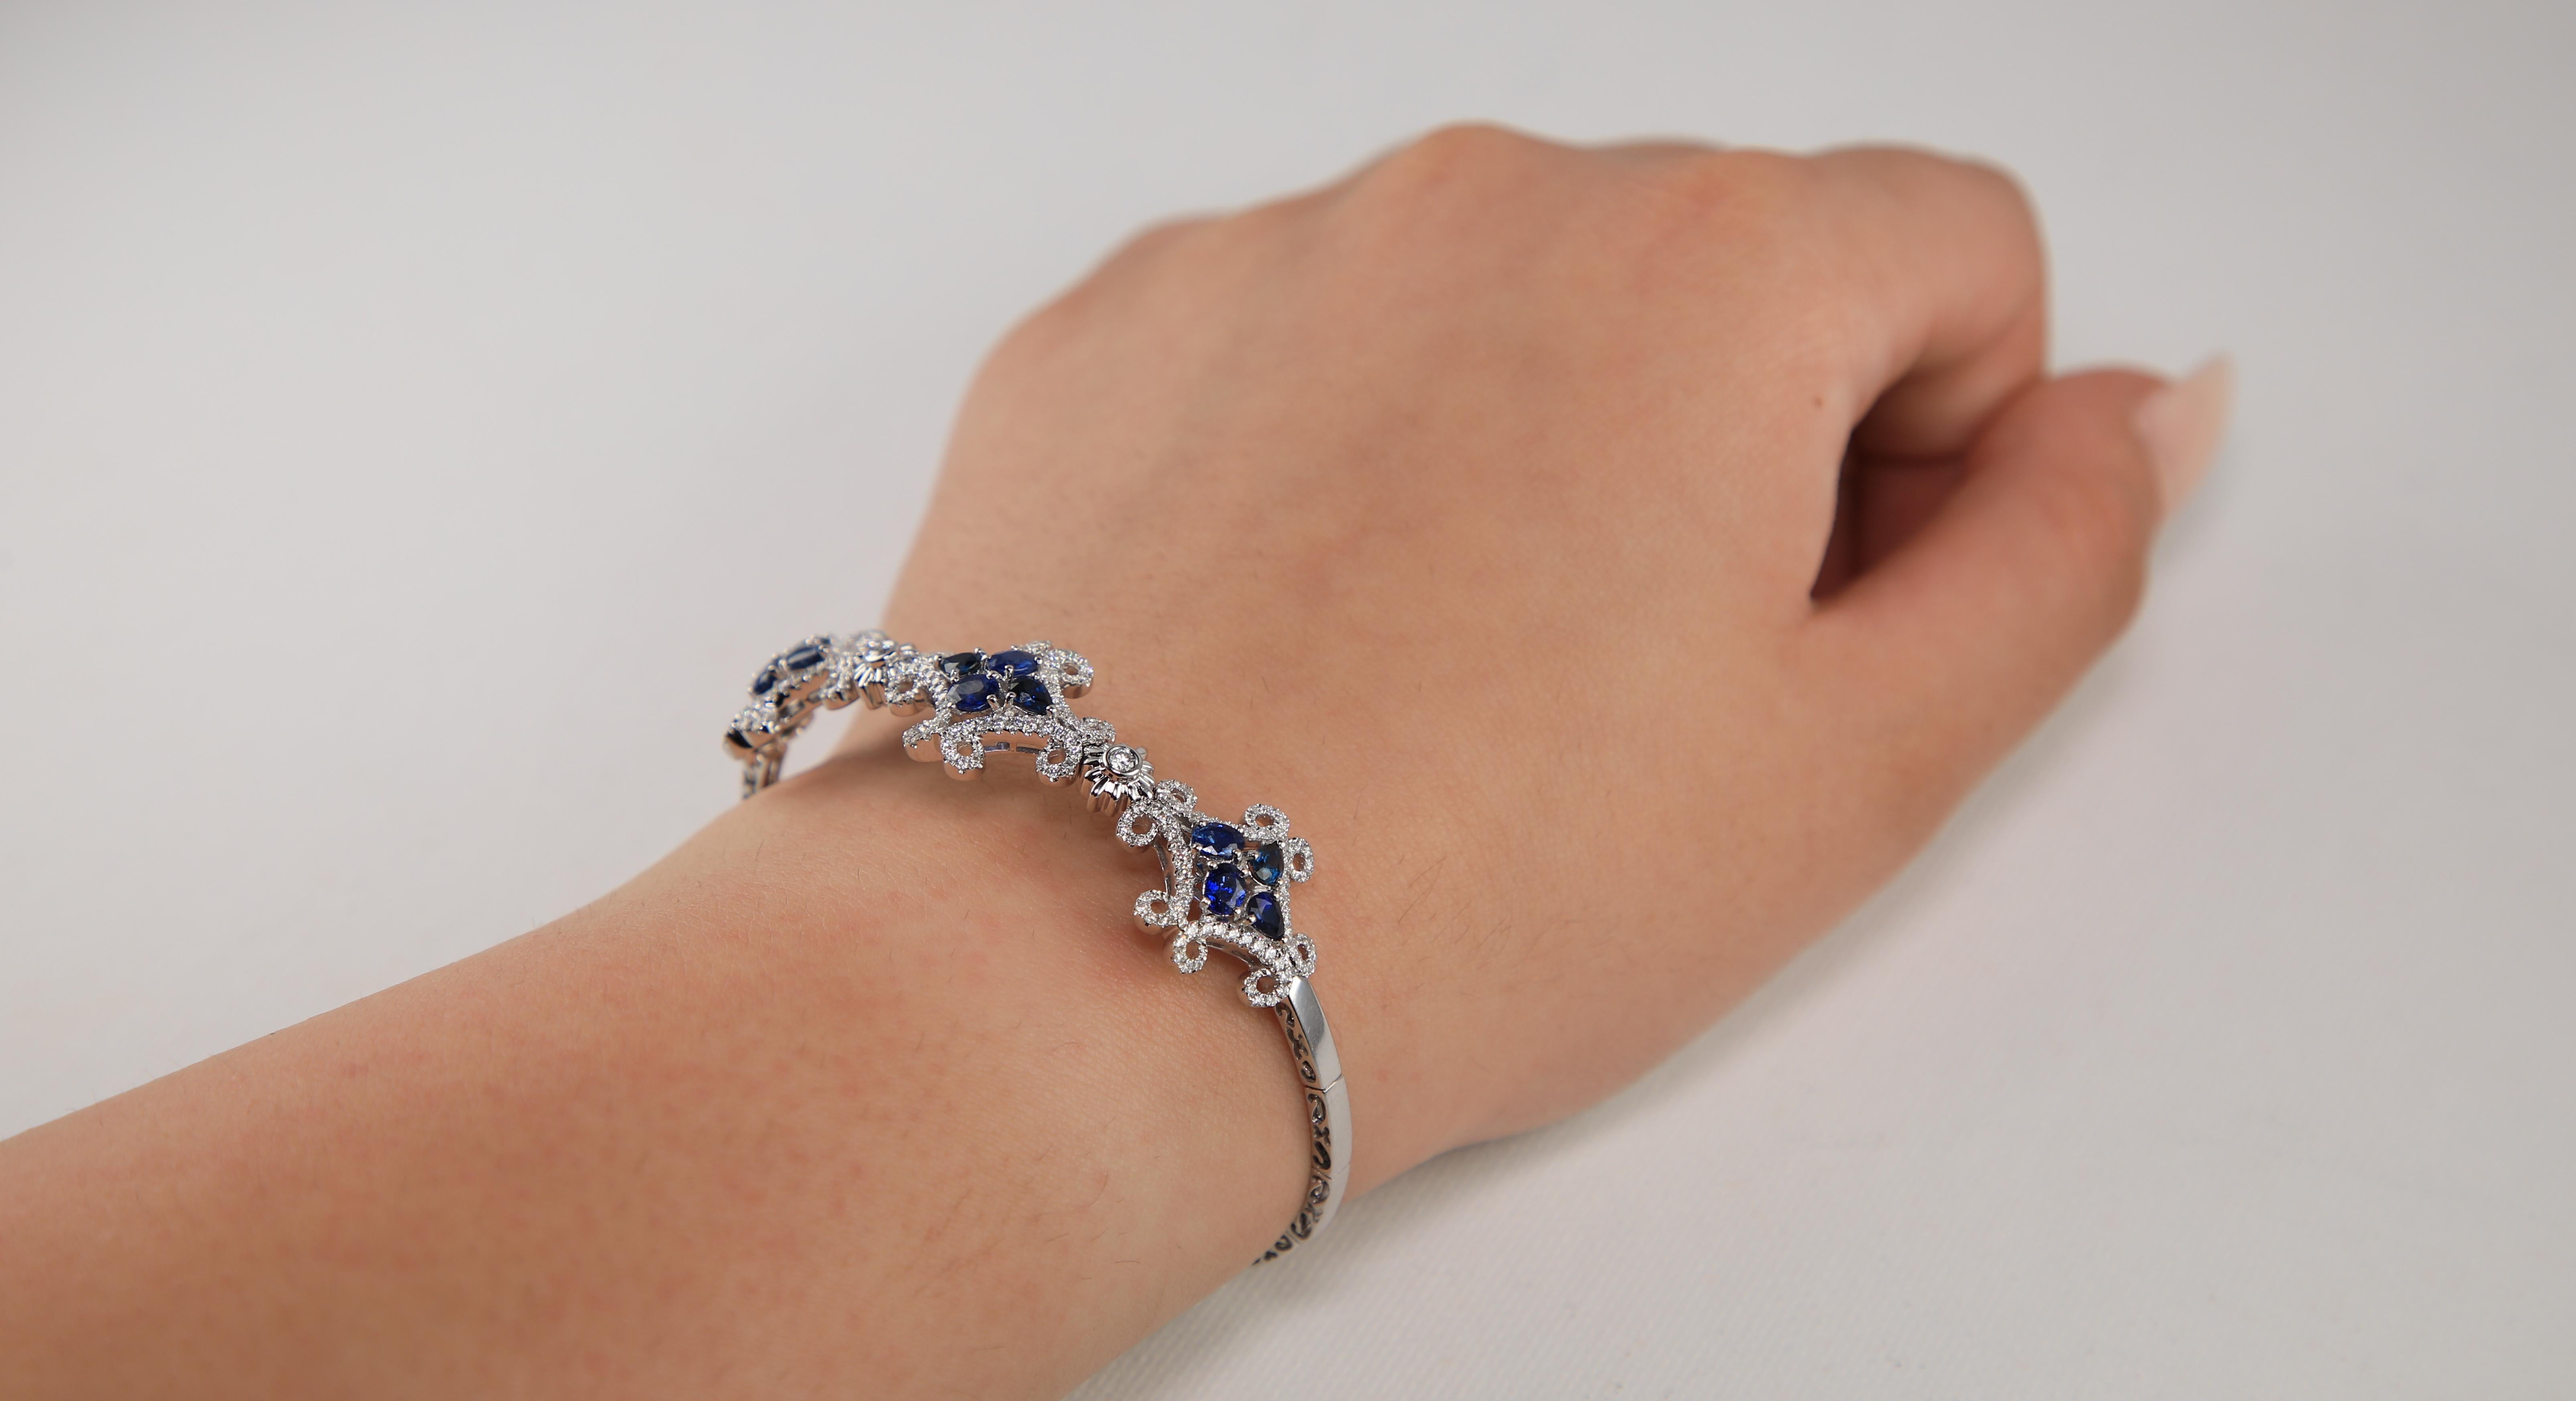 18 Karat White Gold Diamond and Sapphire Cuff Bangle Bracelet In New Condition For Sale In Great Neck, NY